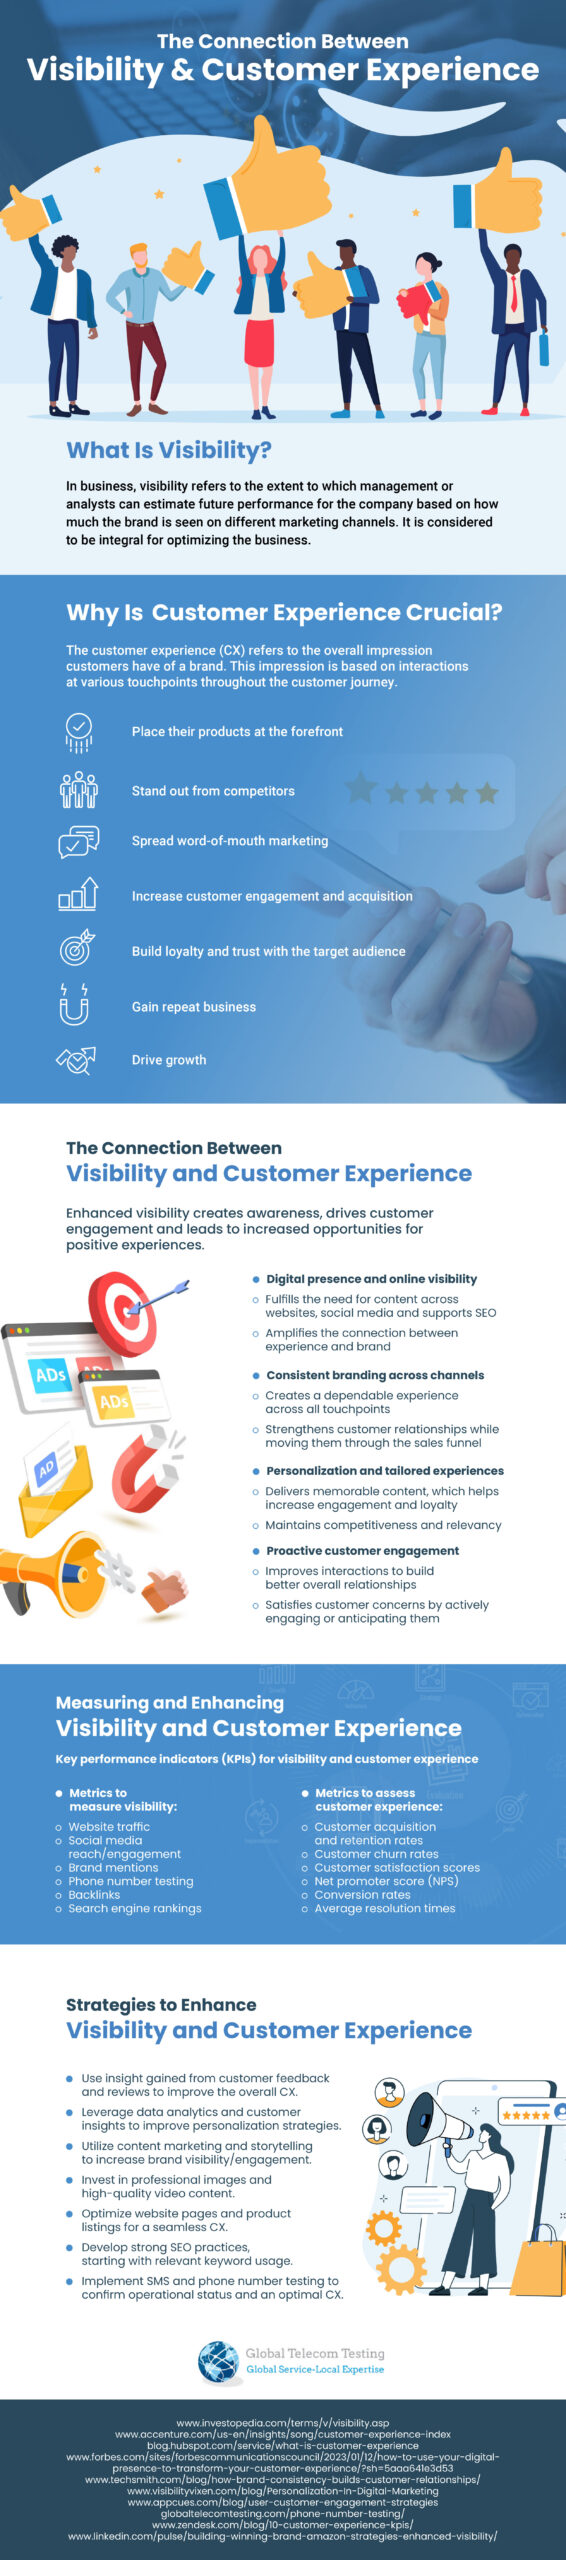 connection between visibility and customer experience infographic